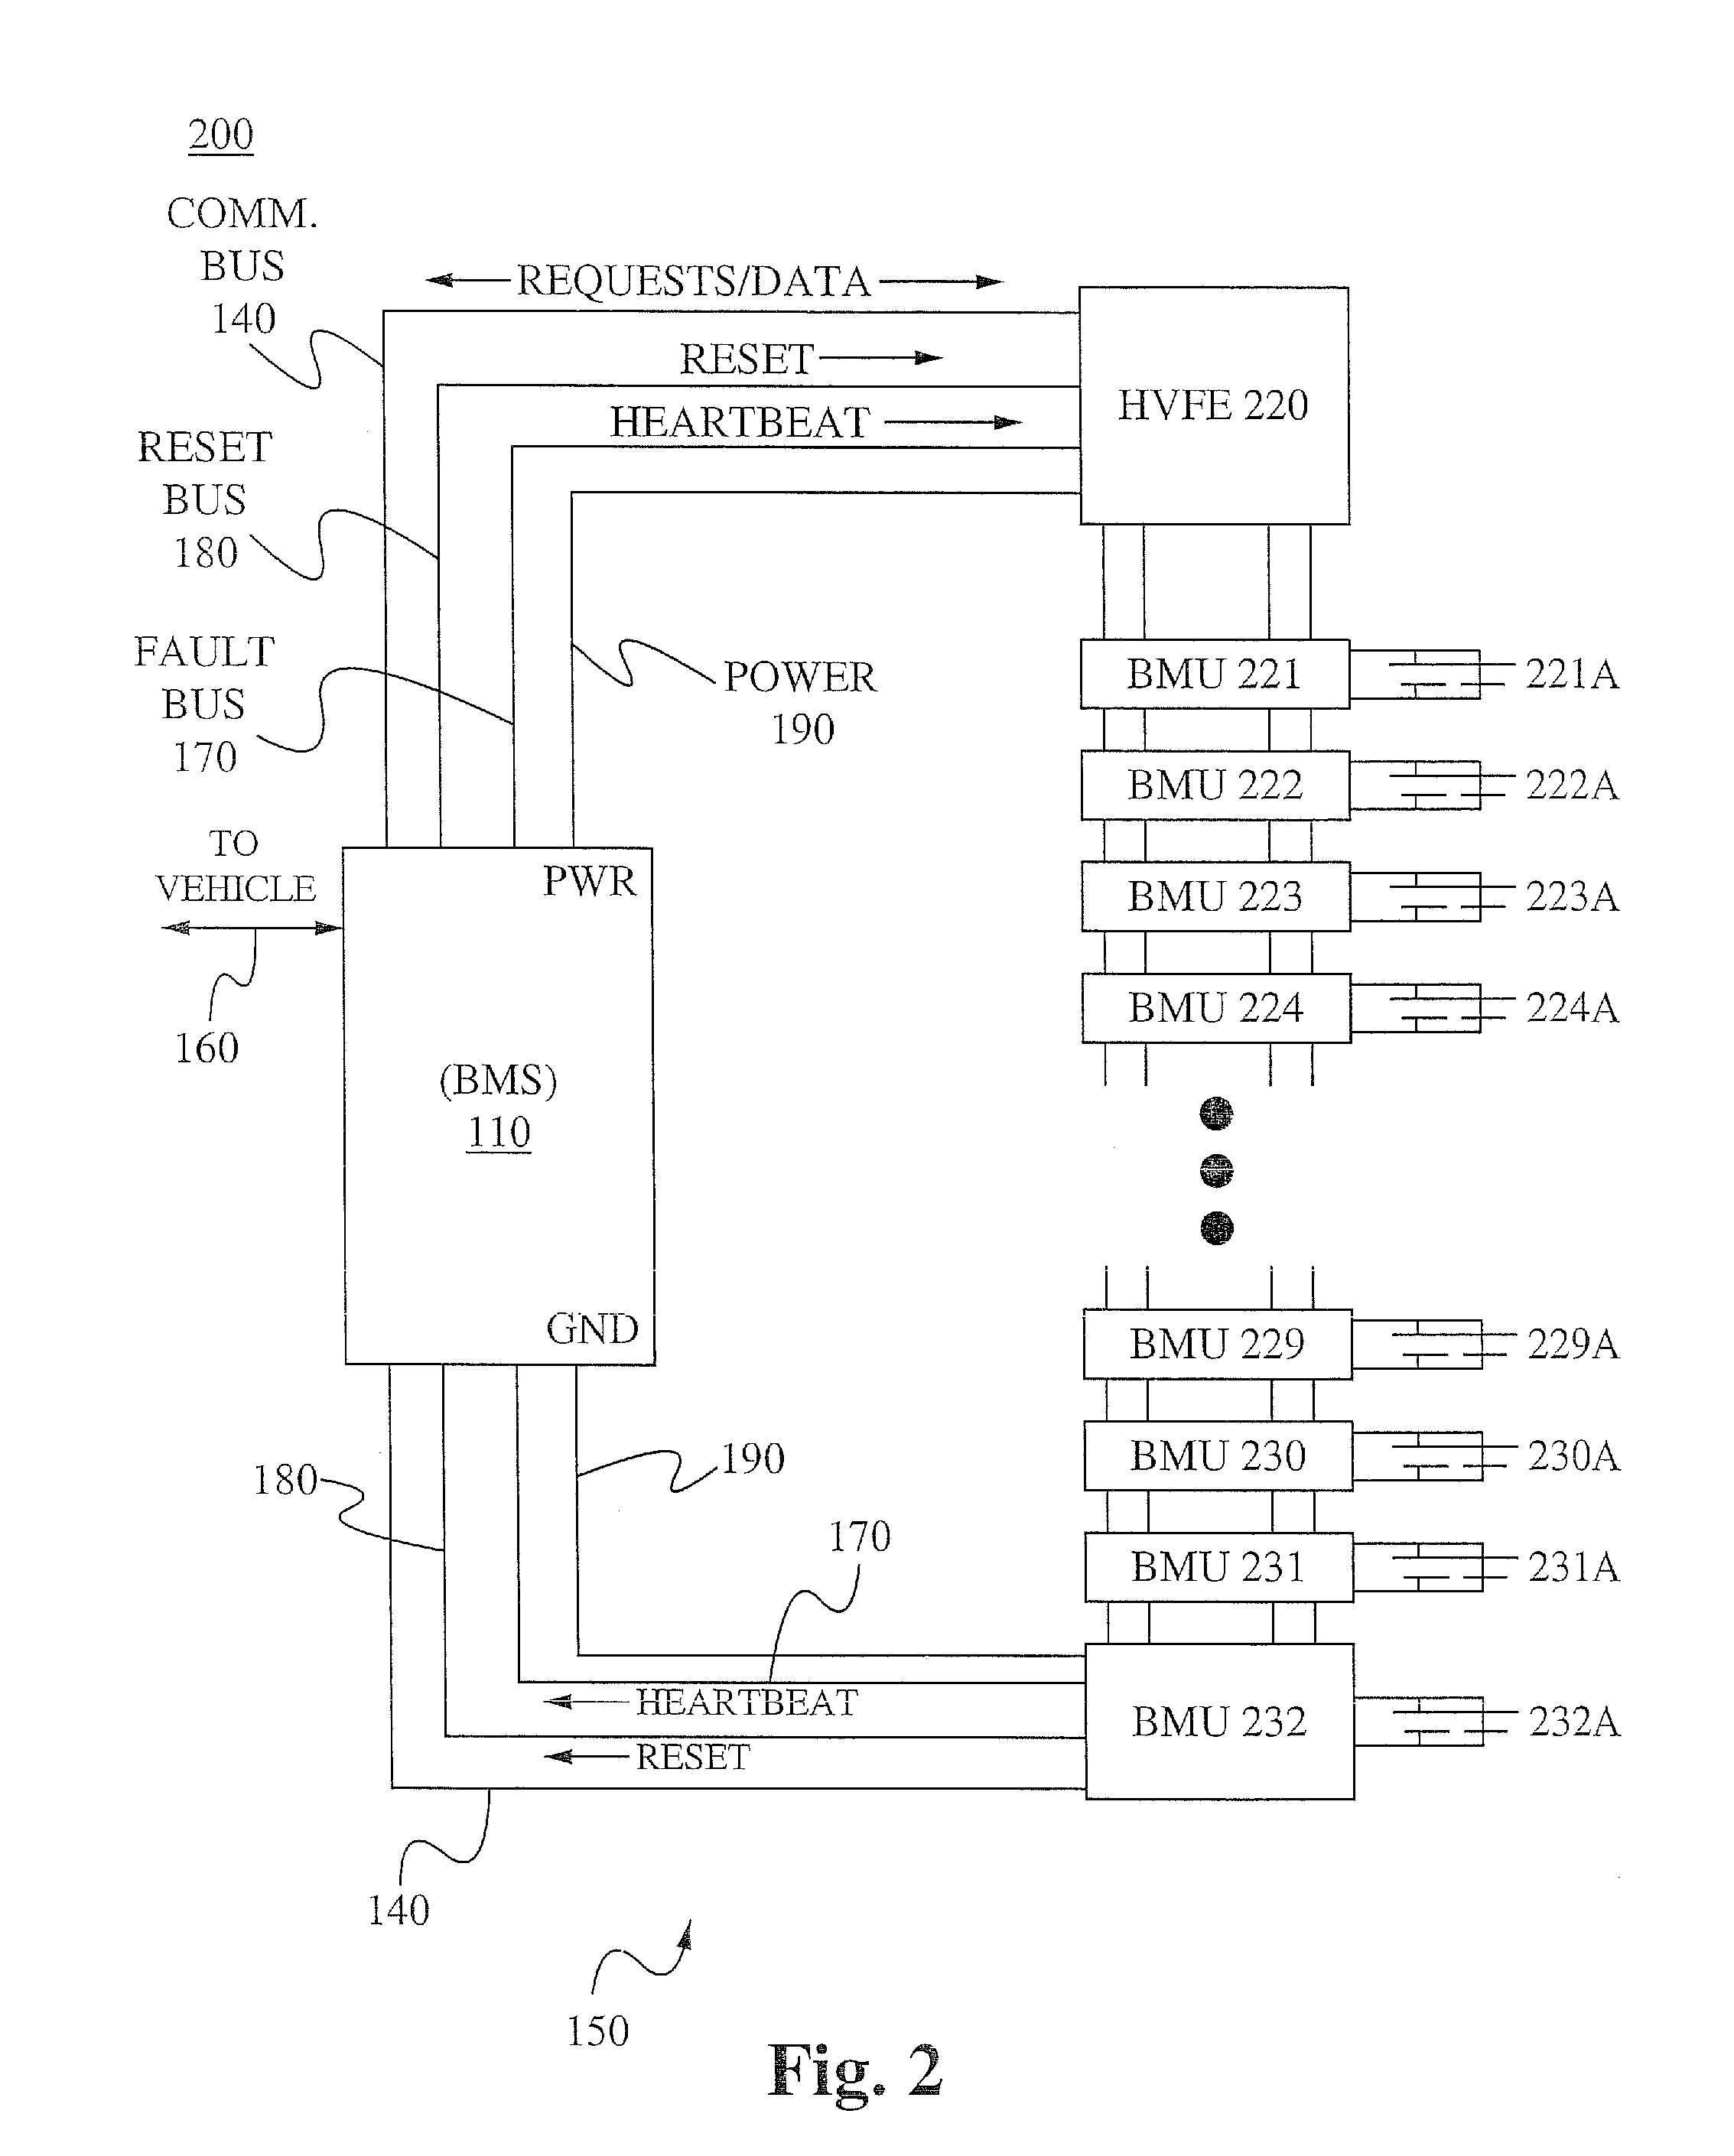 Battery pack fault communication and handling